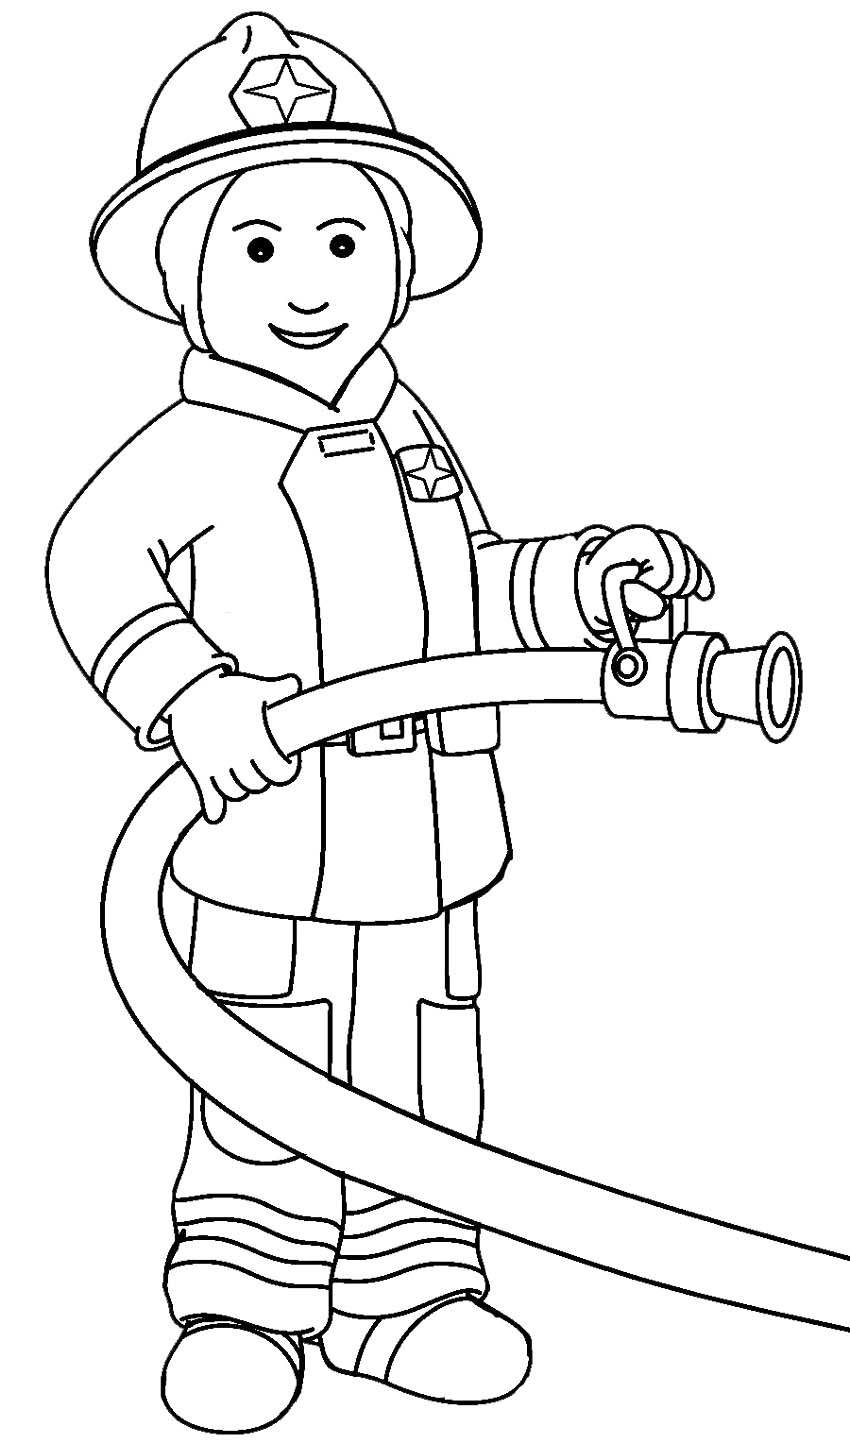 Family, People and Jobs Coloring Sheets: Fireman Jobs Coloring